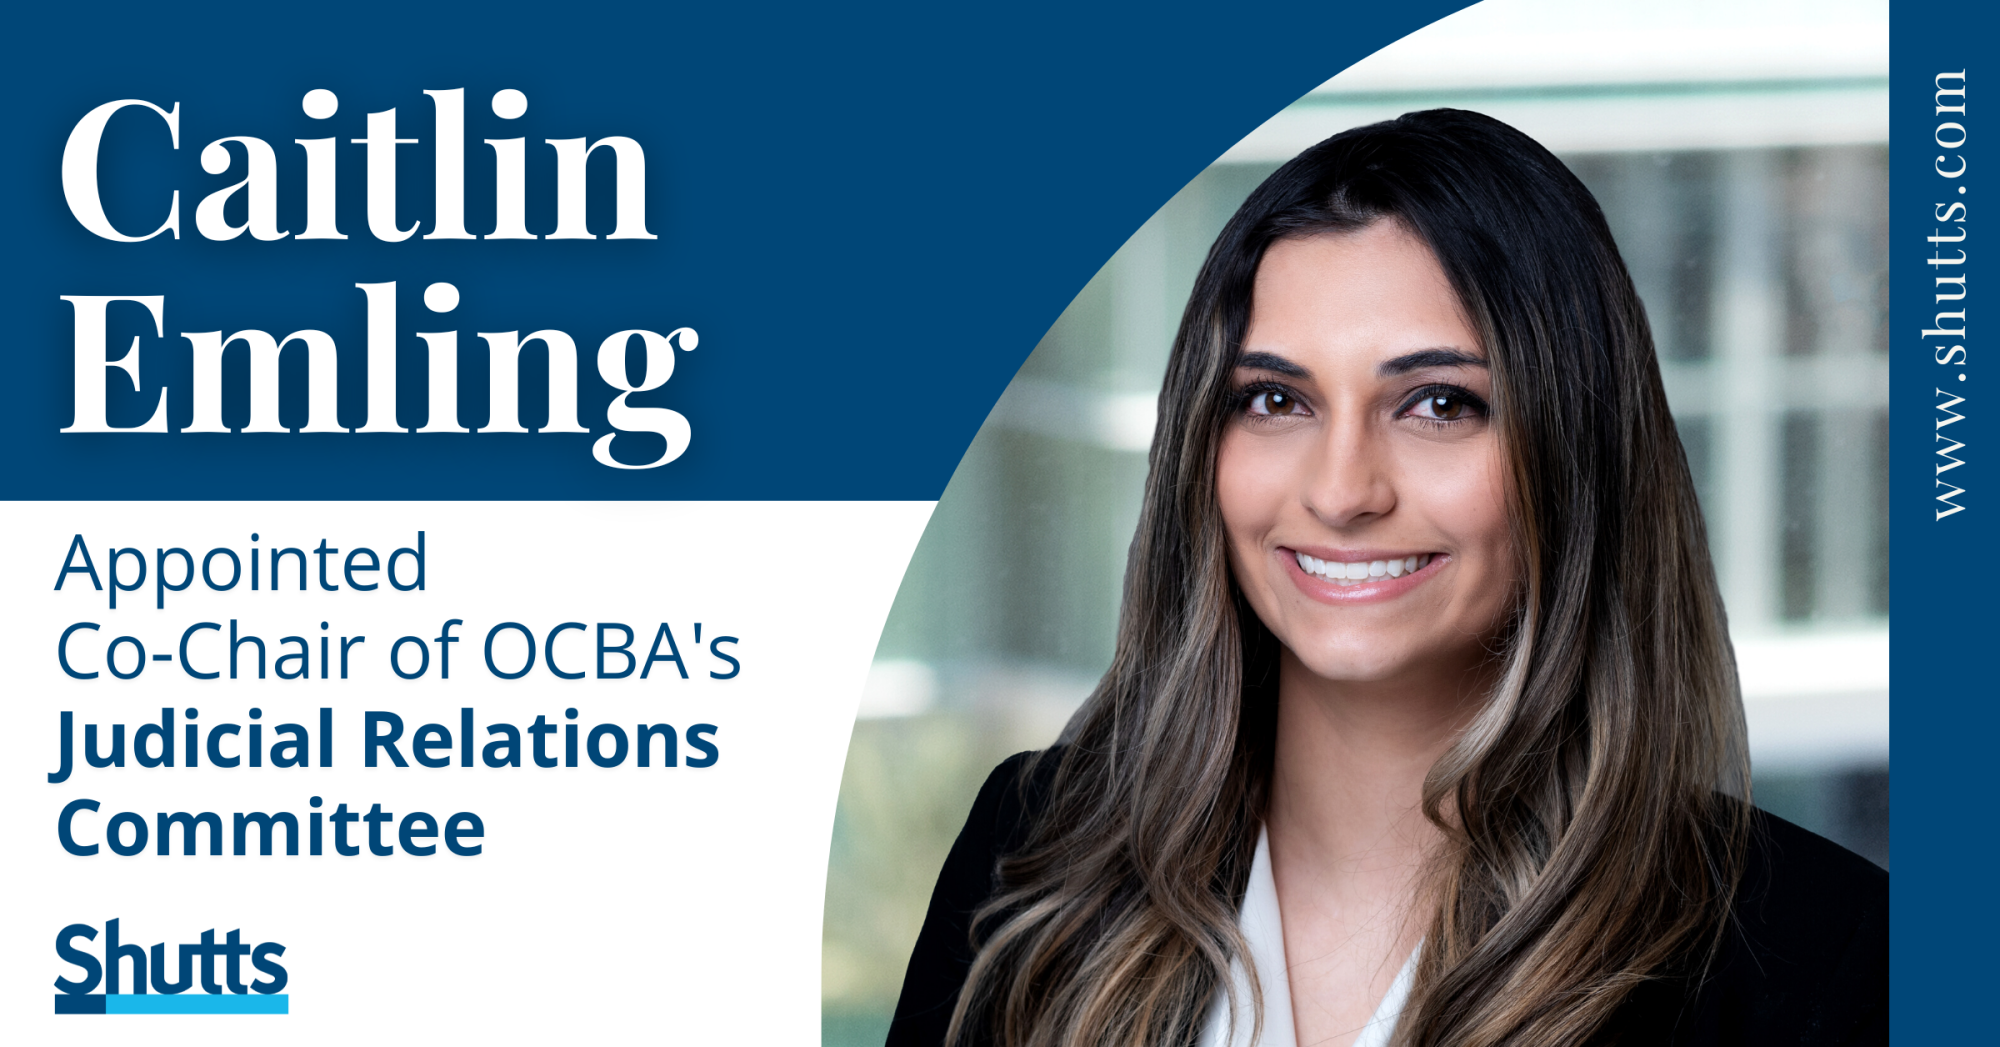 Caitlin Emling Appointed Co-Chair of OCBA Judicial Relations Committee